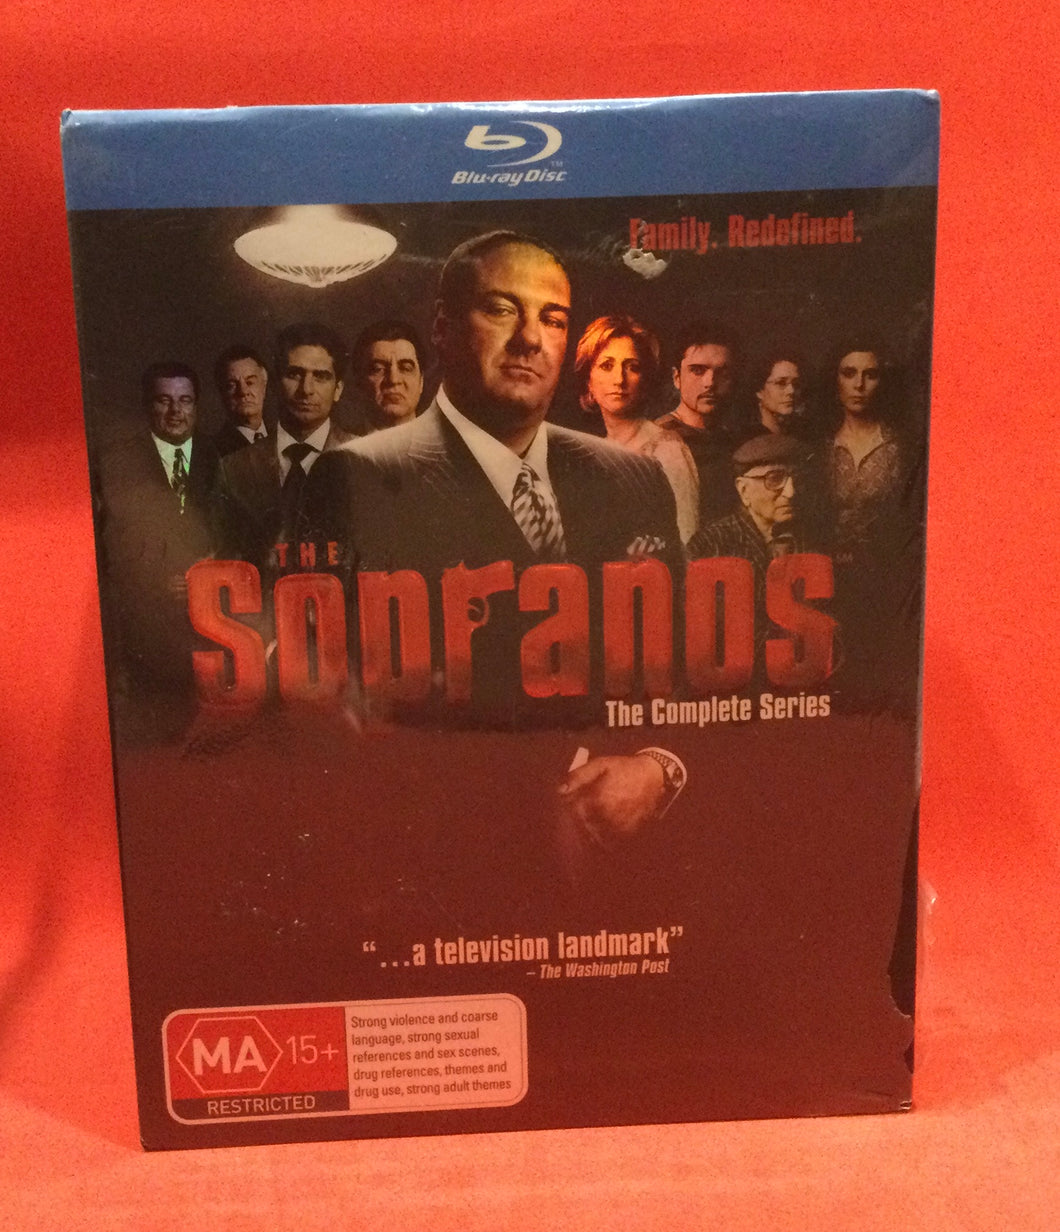 SOPRANOS, THE - COMPLETE SERIES - BLU-RAY - 28 DISCS (SEALED)